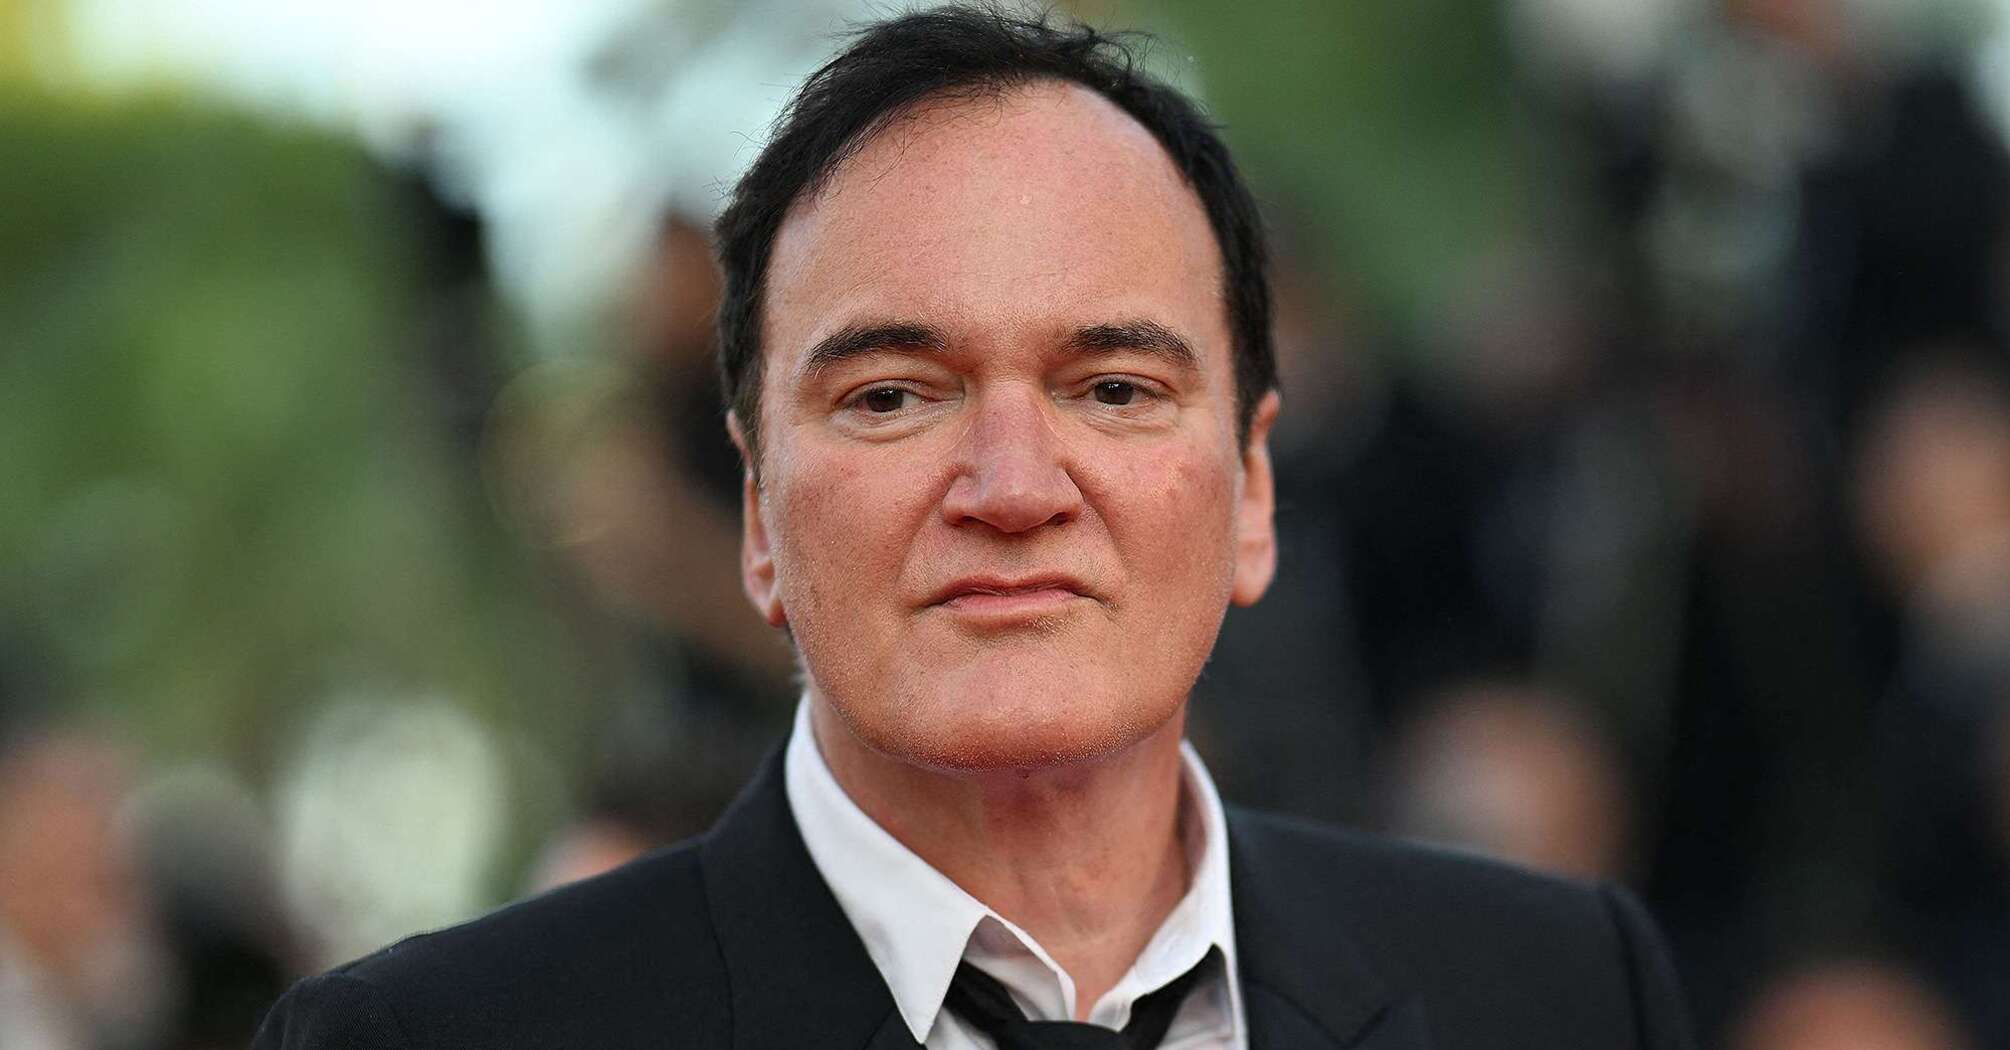 5 interesting facts about Quentin Tarantino